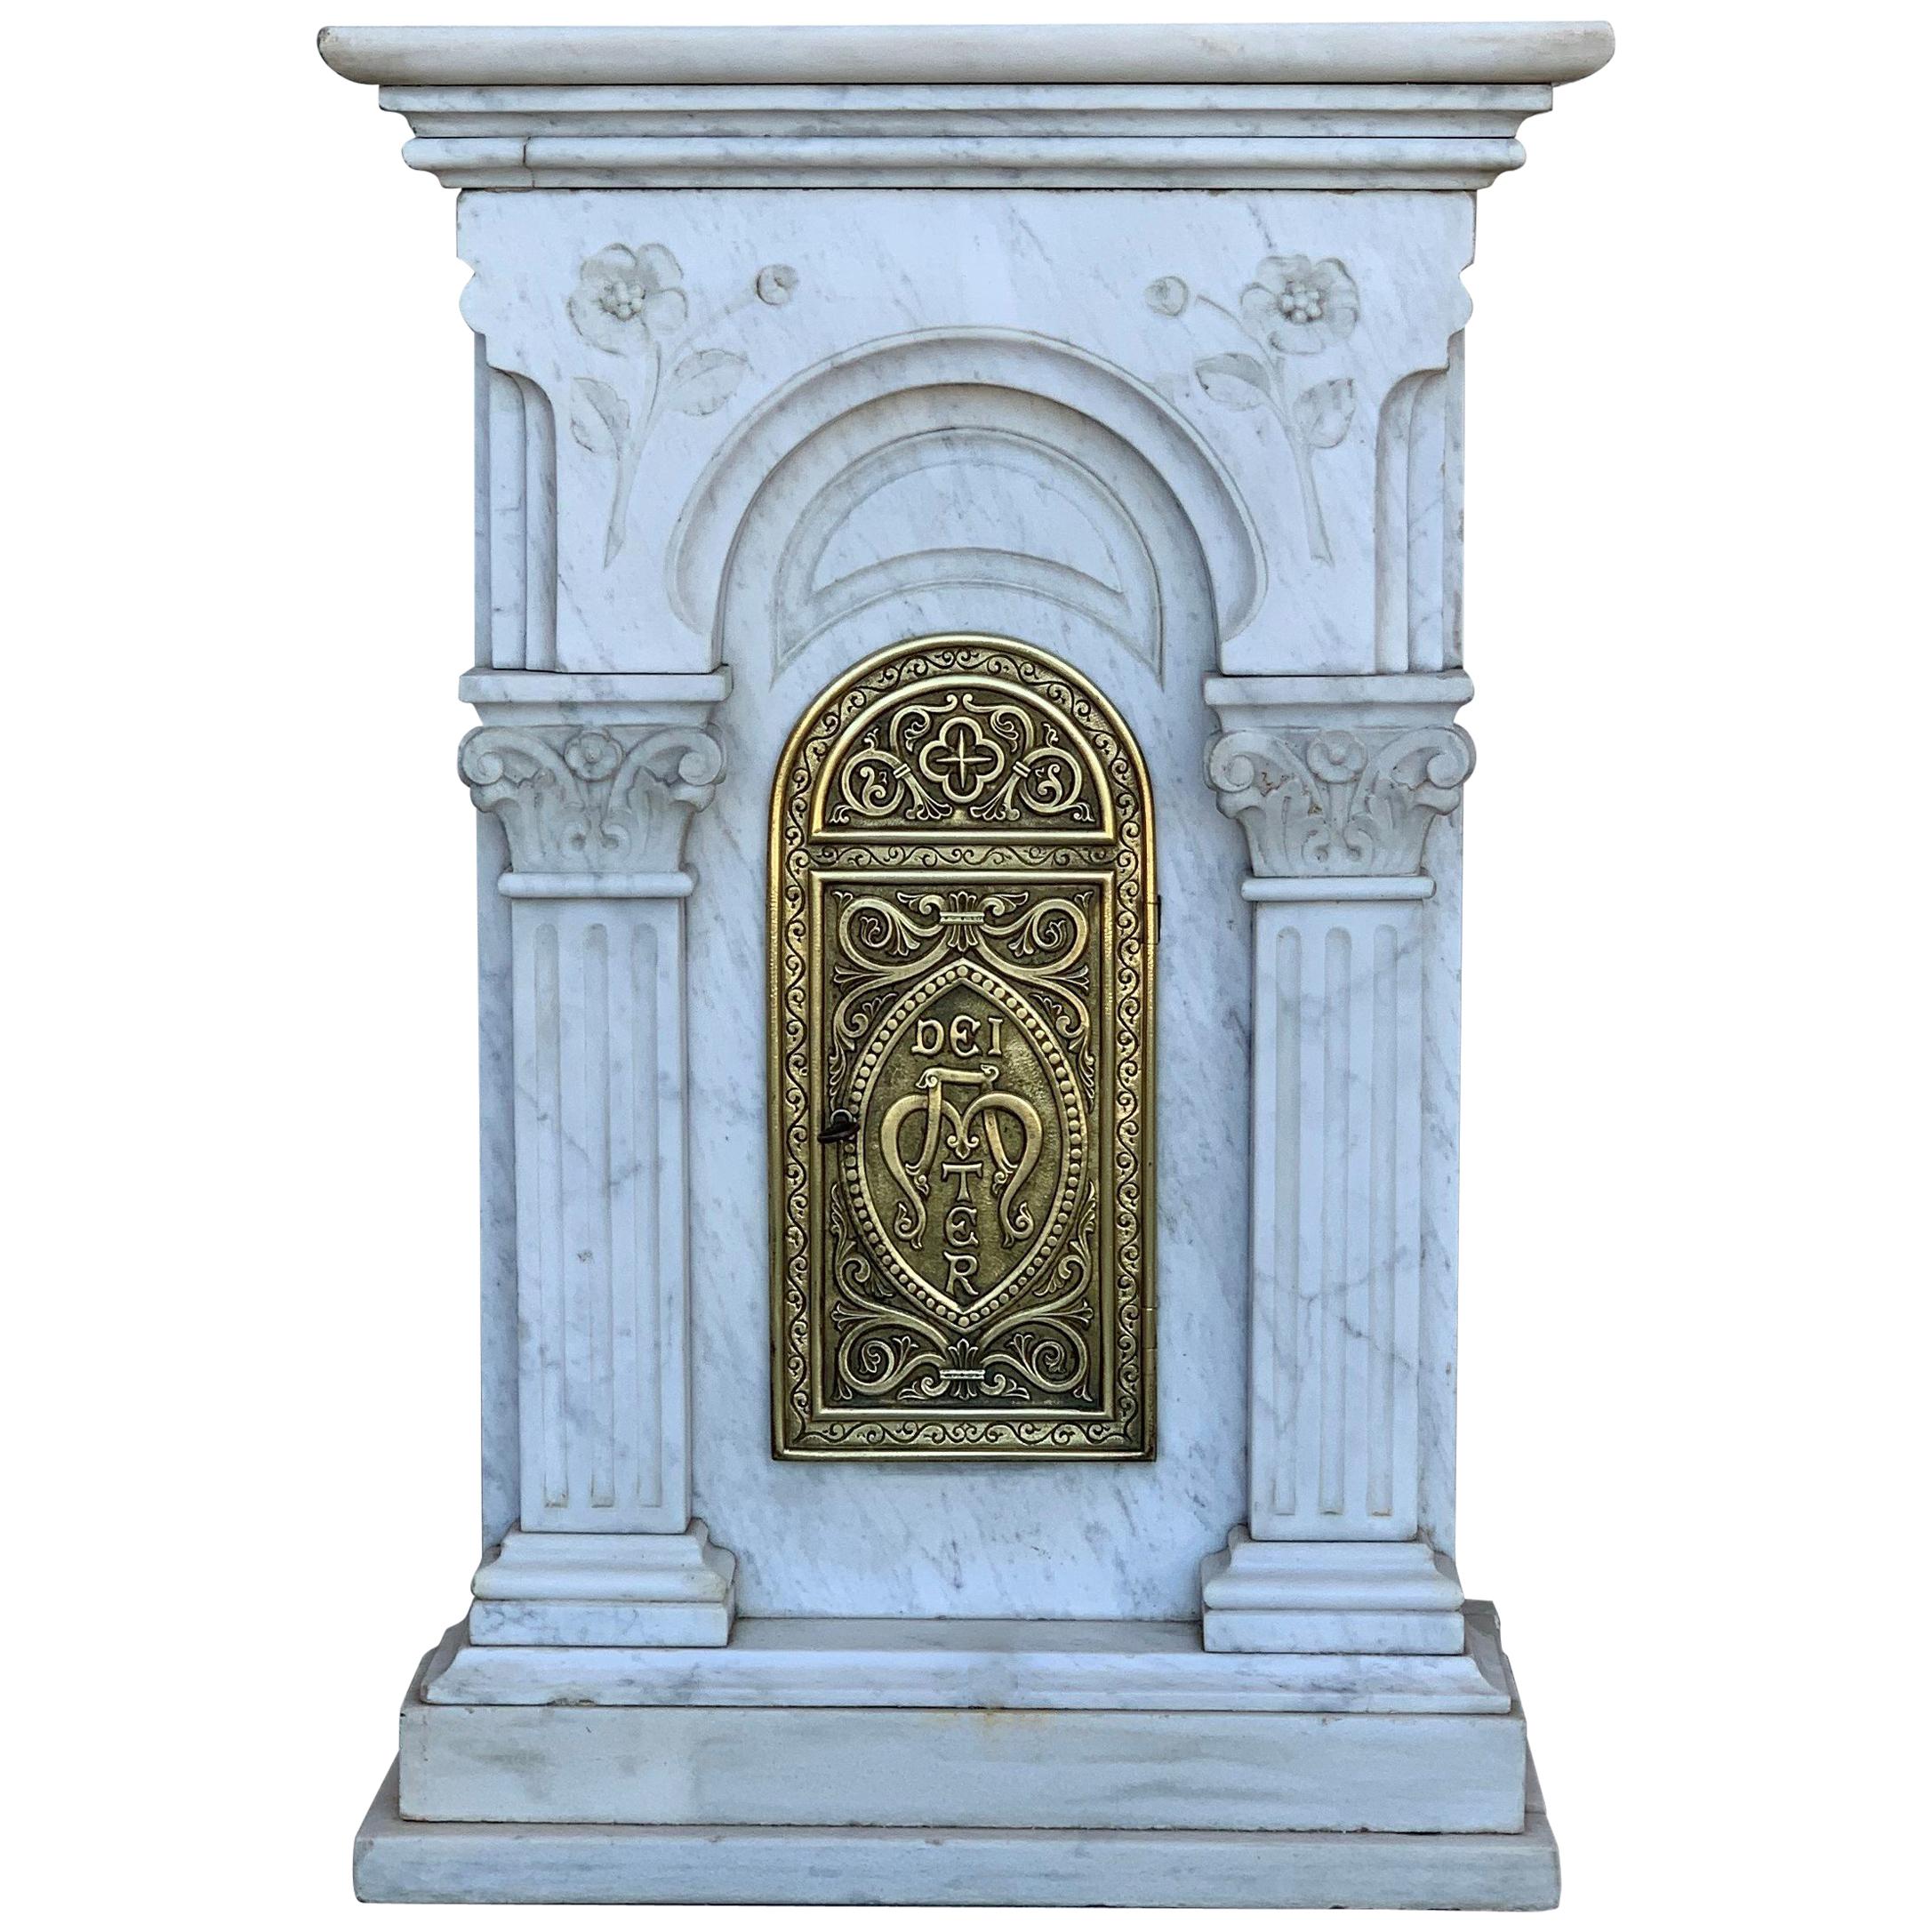 19th Century Carved Carrara Marble and Bronze Monstrance for Custody "Sanctuary"